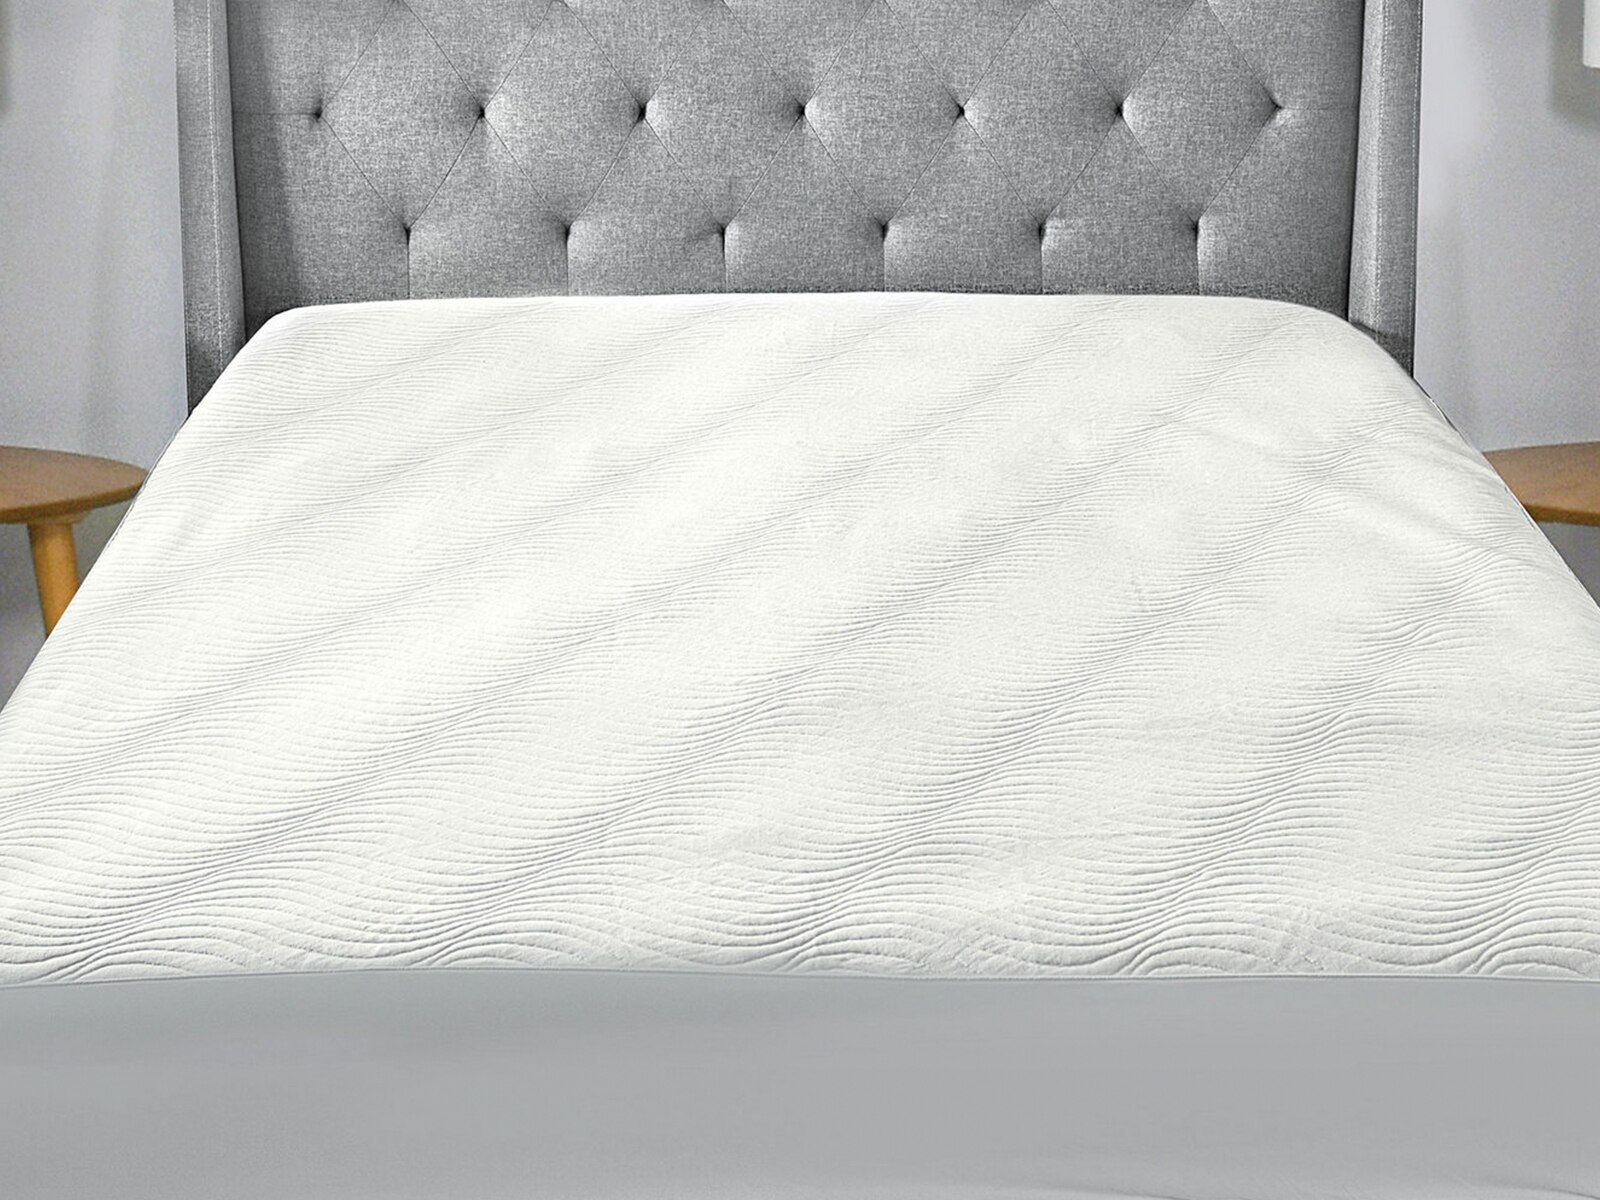 luxury knit mattress protector white - sealy